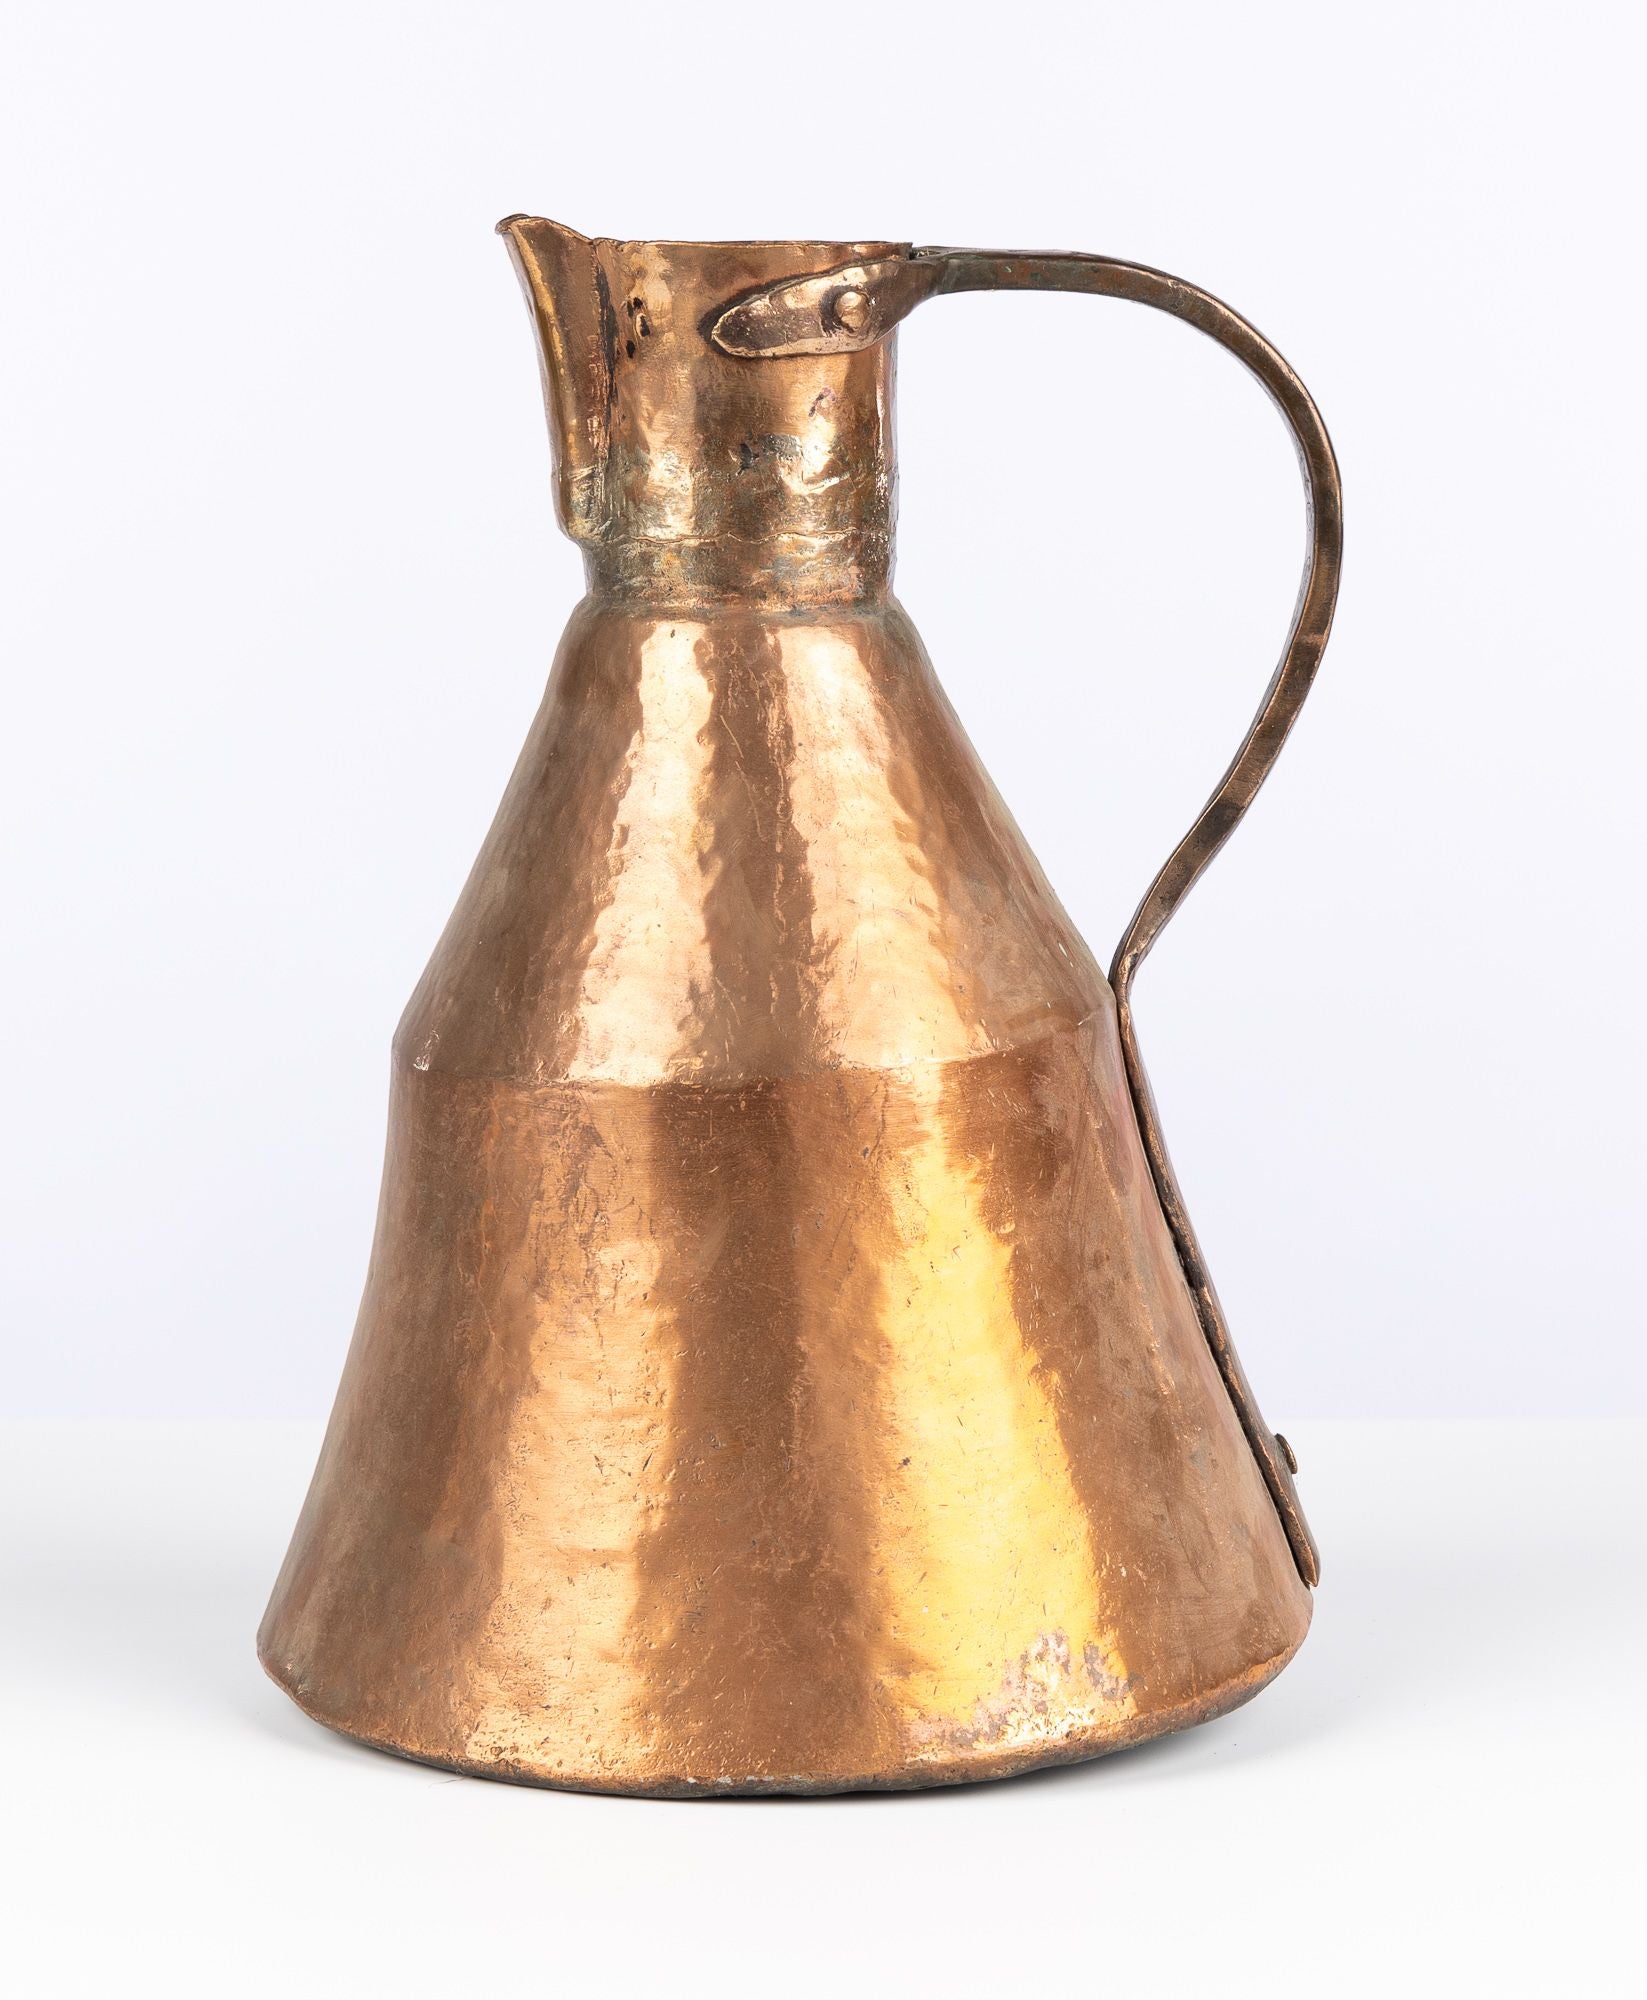 Antique French copper jug